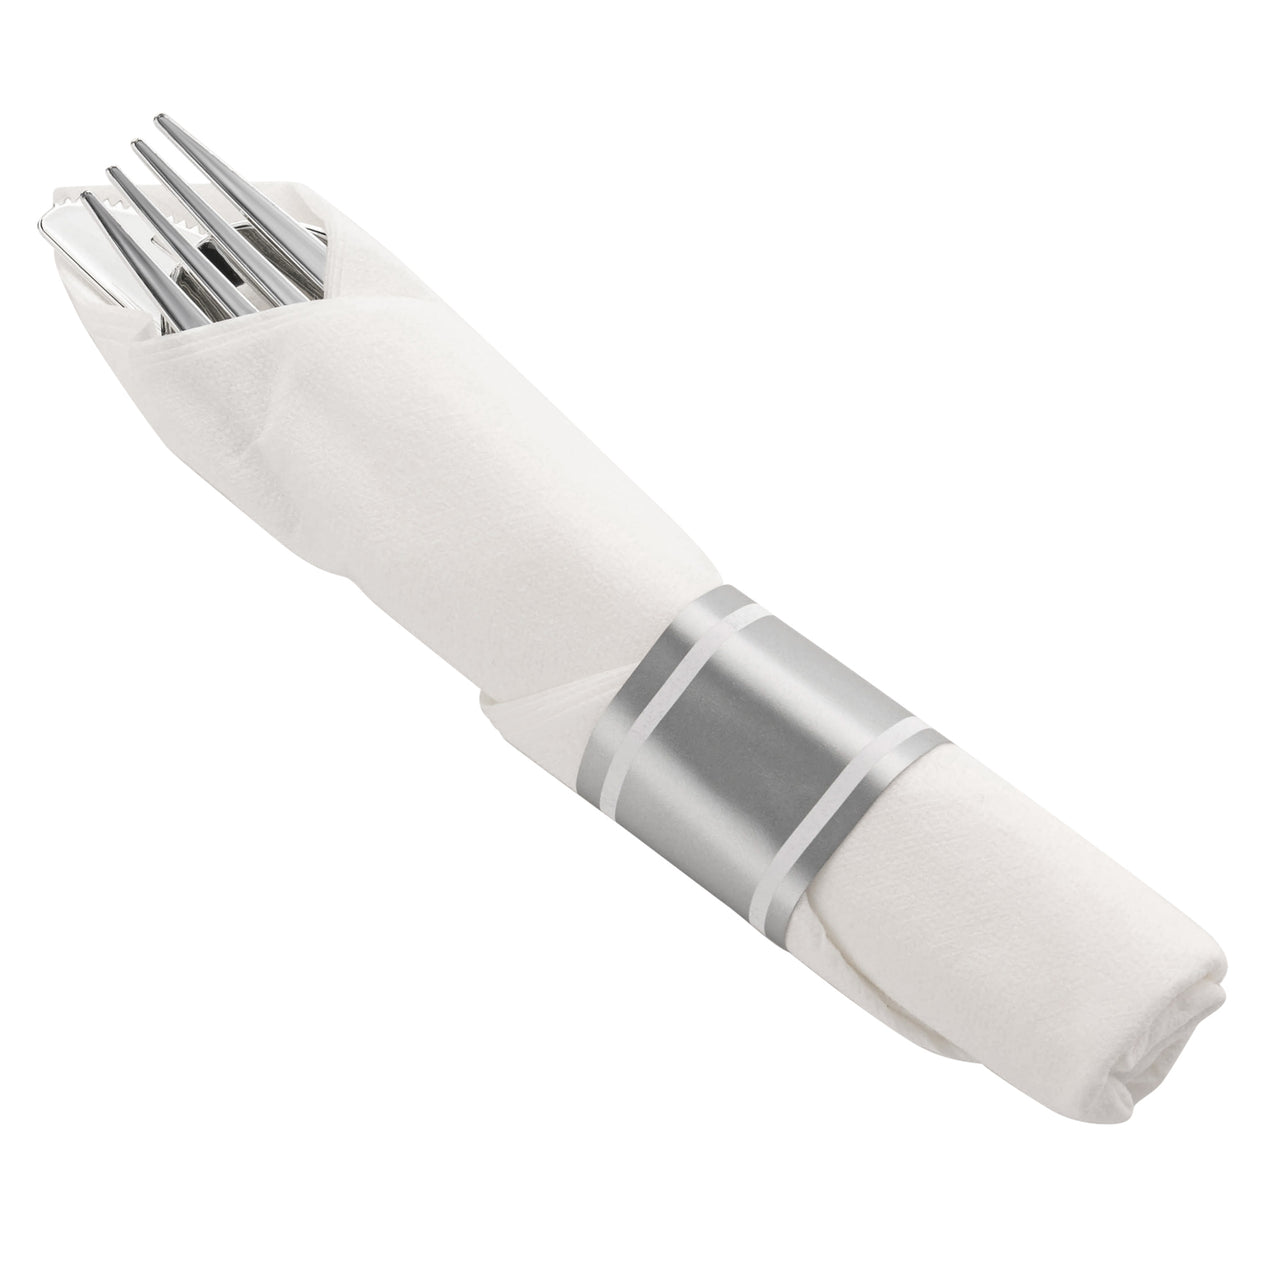 Silver Plastic Cutlery in White Napkin Rolls Set - 10 Napkins, 10 Forks, 10 Knives, 10 Spoons and 10 Paper Rings